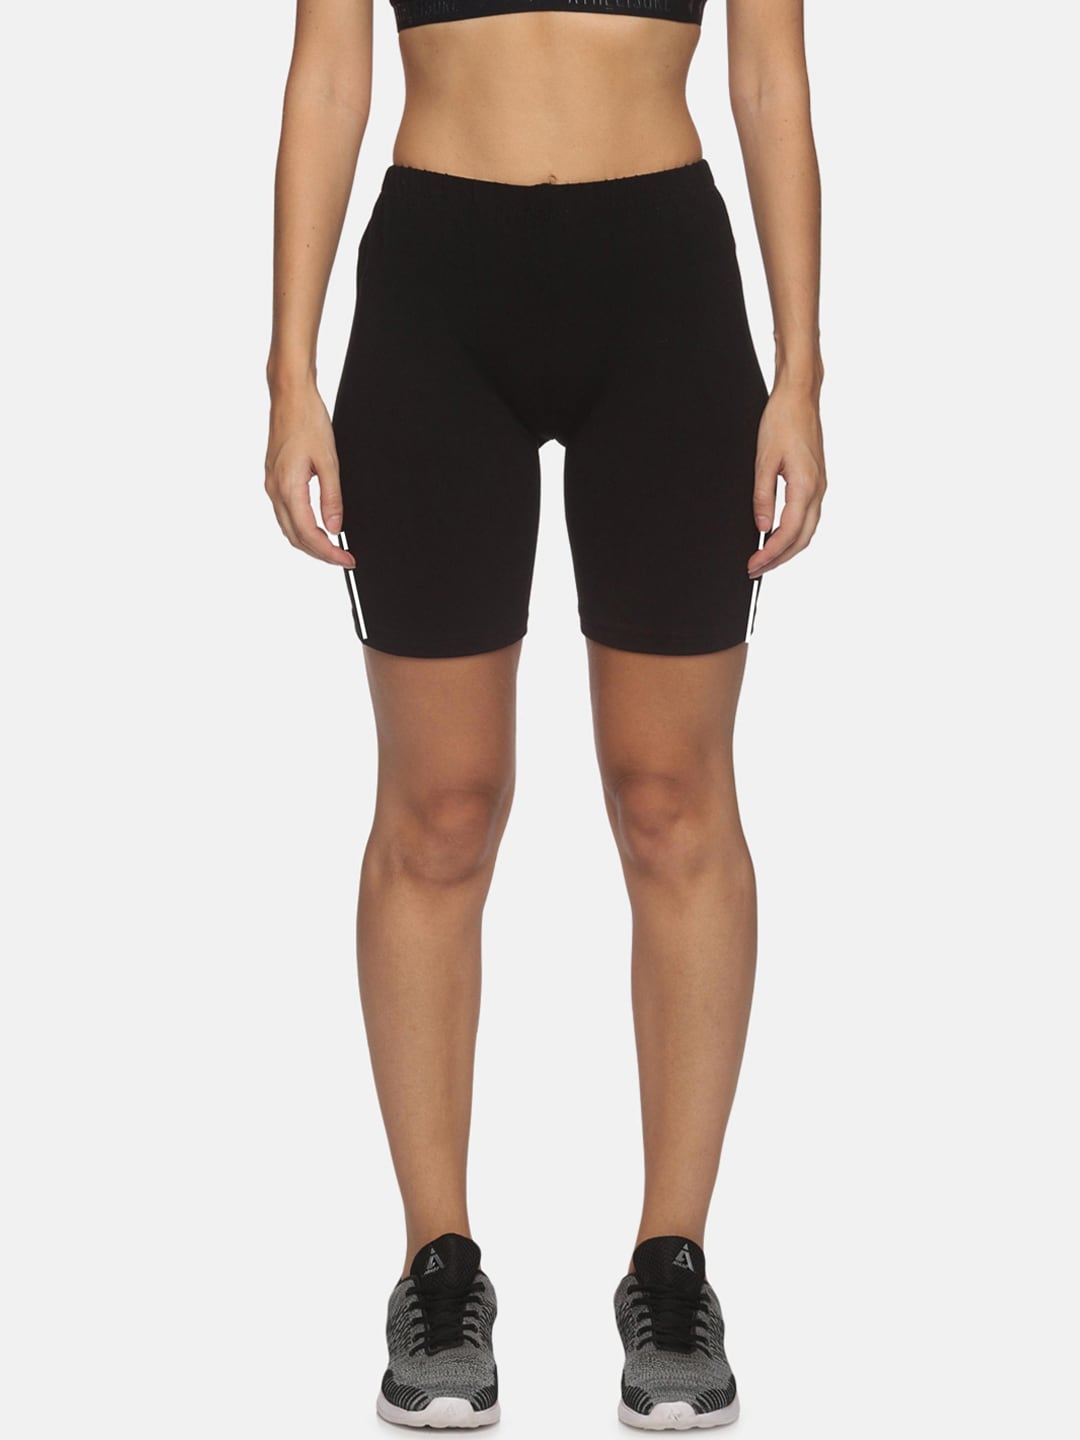 NOT YET by us Women Black Slim Fit Cycling Sports Shorts Price in India